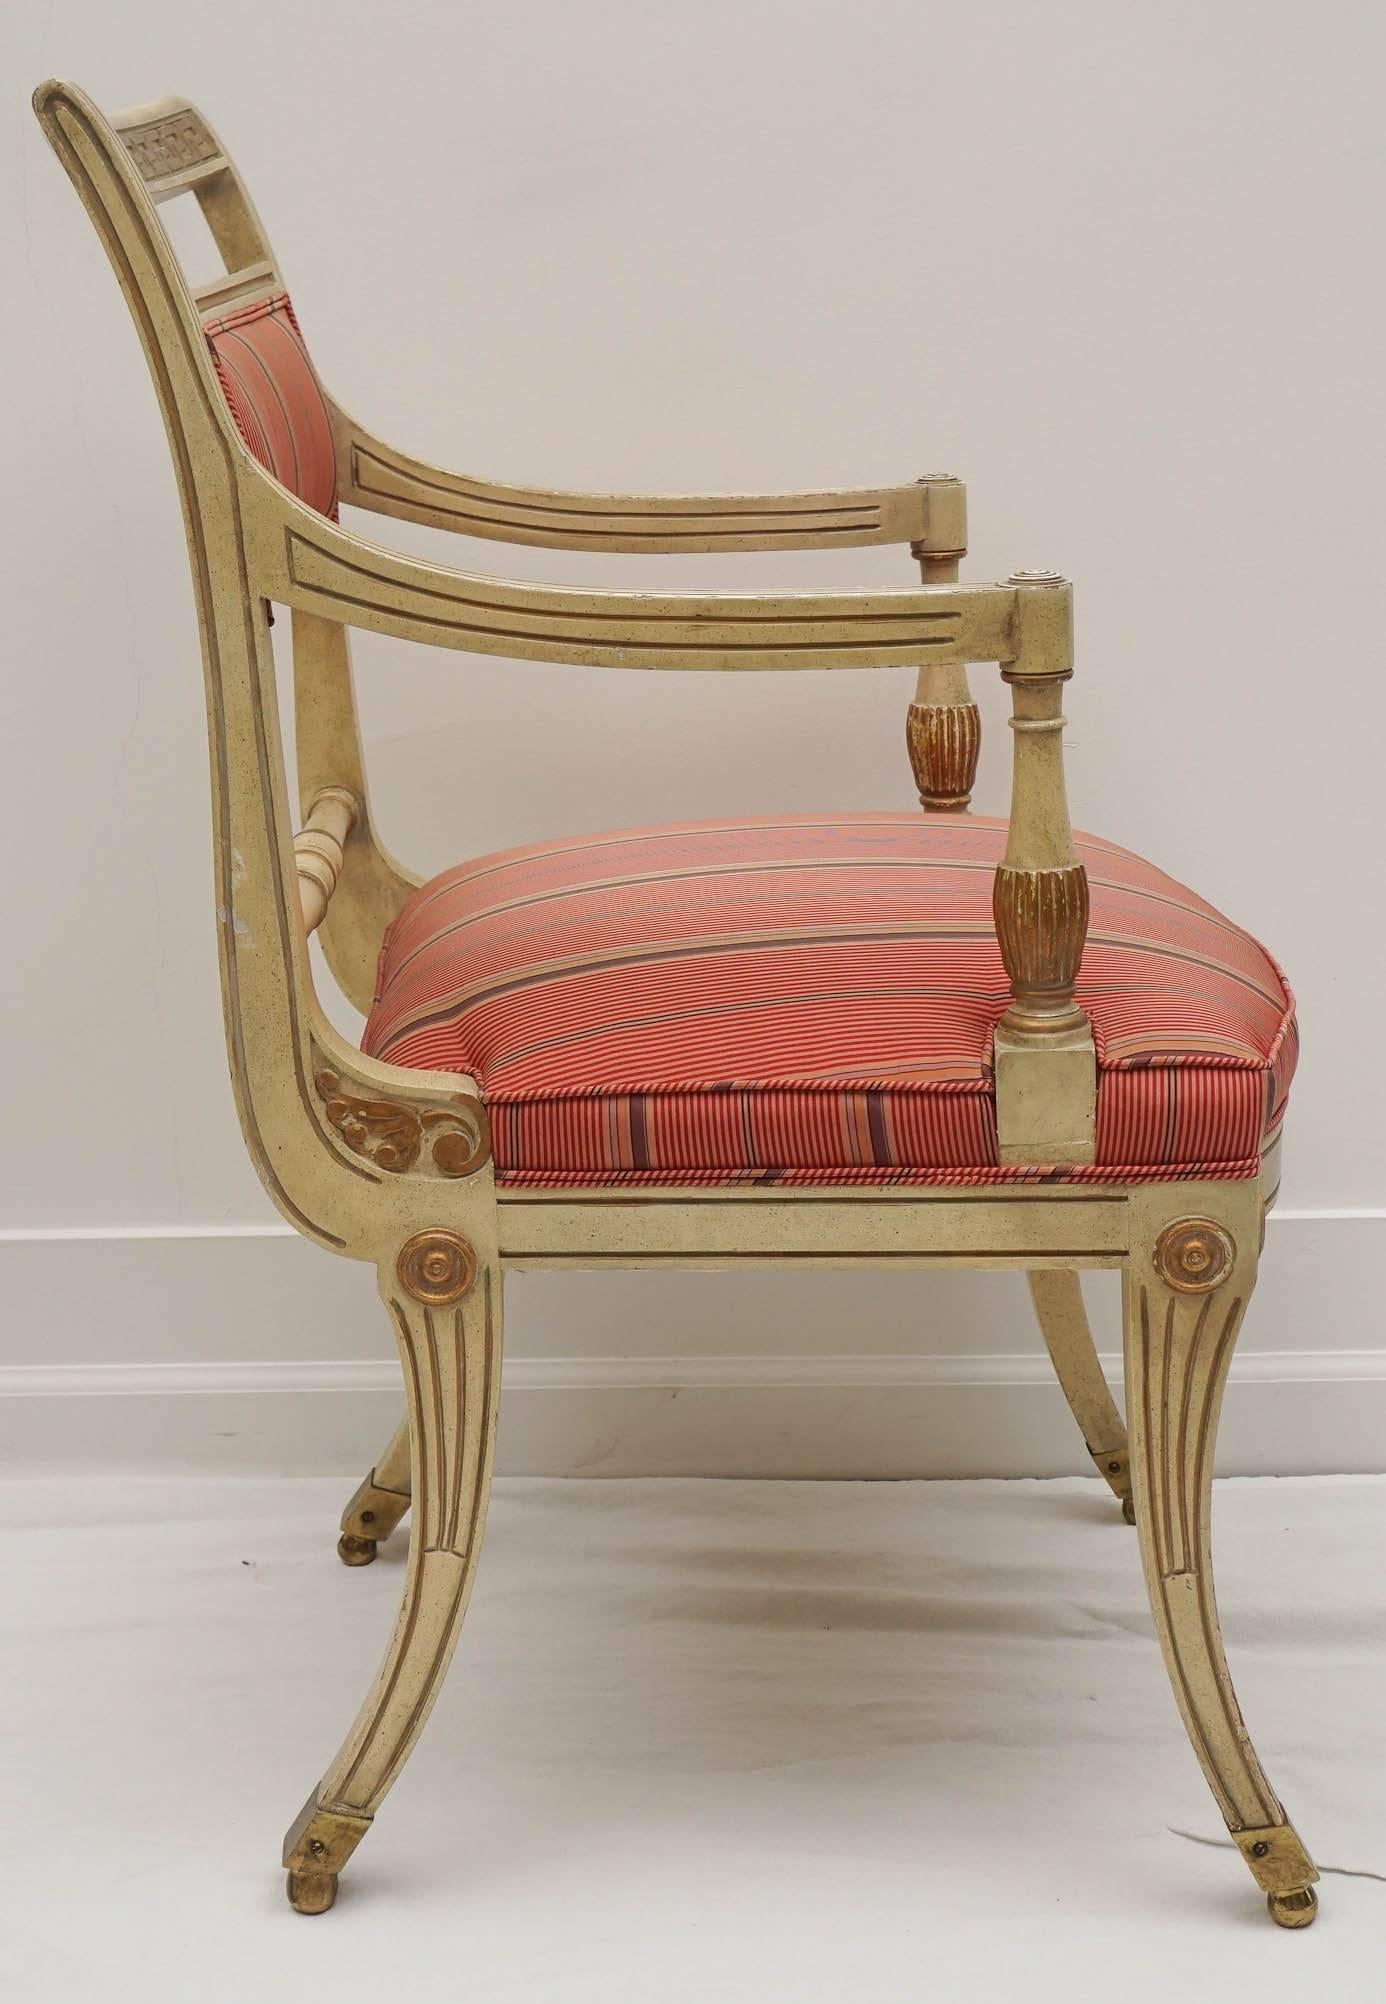 this chair has it all from the Hollywood Regency period.
the klismos legs, the Greek Key trim, the gold leafing, and the brass feet!
the fabric is very usable. however, and update would be best.   